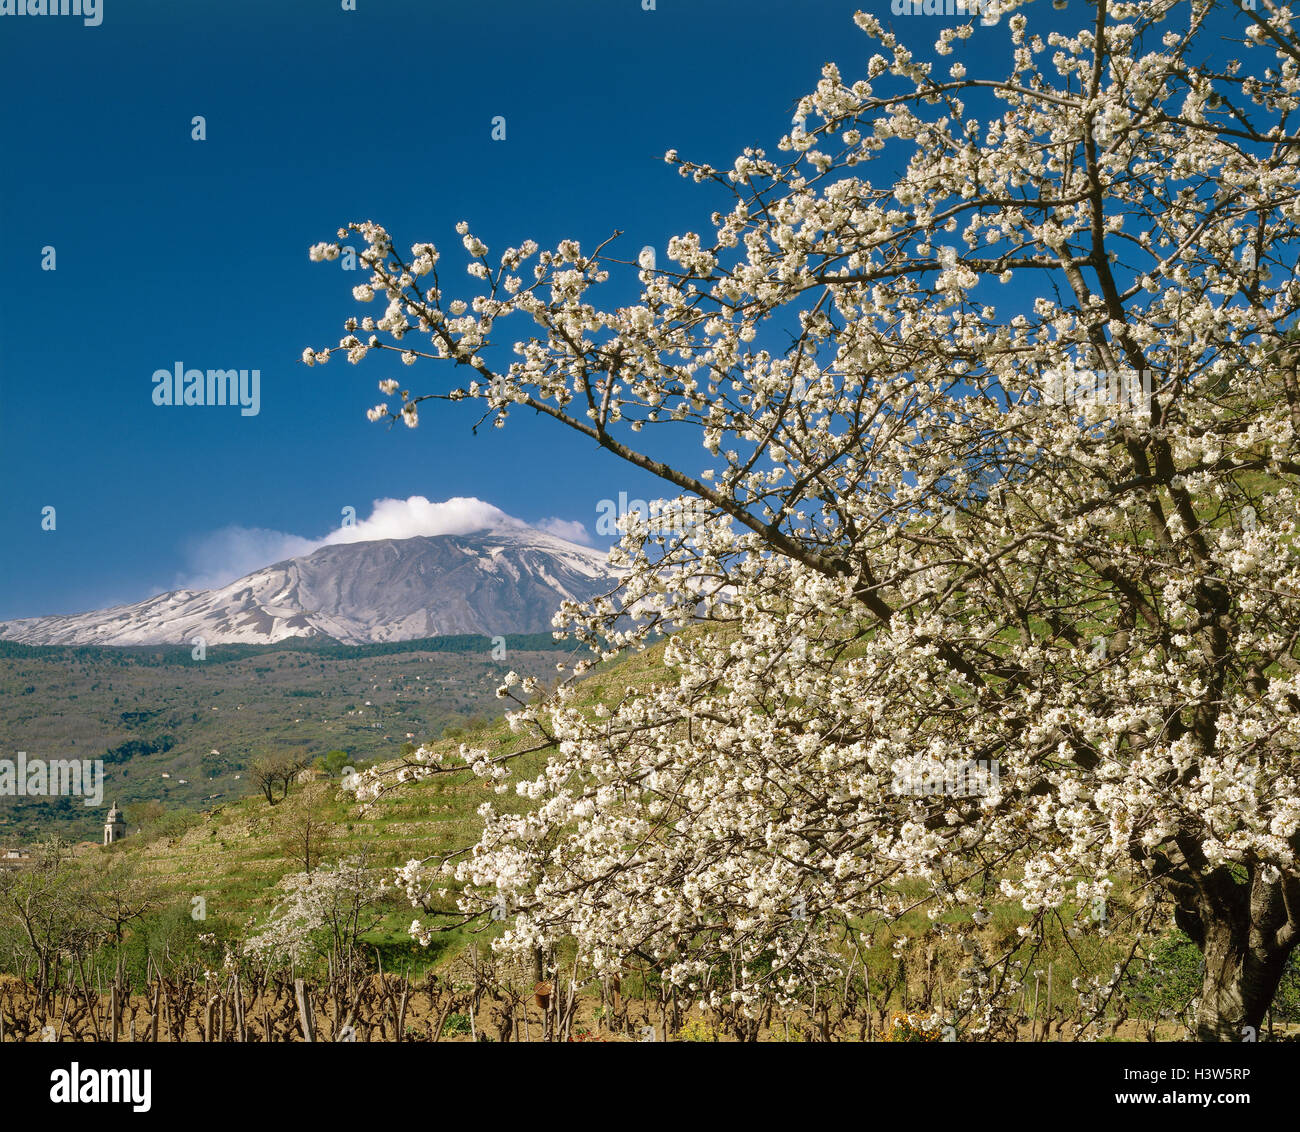 Italy, Sicily, Etna, fruit blossom, Europe, Southern Europe, Süditalien, volcano, the biggest active volcano of Europe, 3323 metres, island, scenery, spring, spring scenery, blossoming of a tree, nature, viticulture, annex, fruit blossoms, white, mountain, volcano, actively Stock Photo